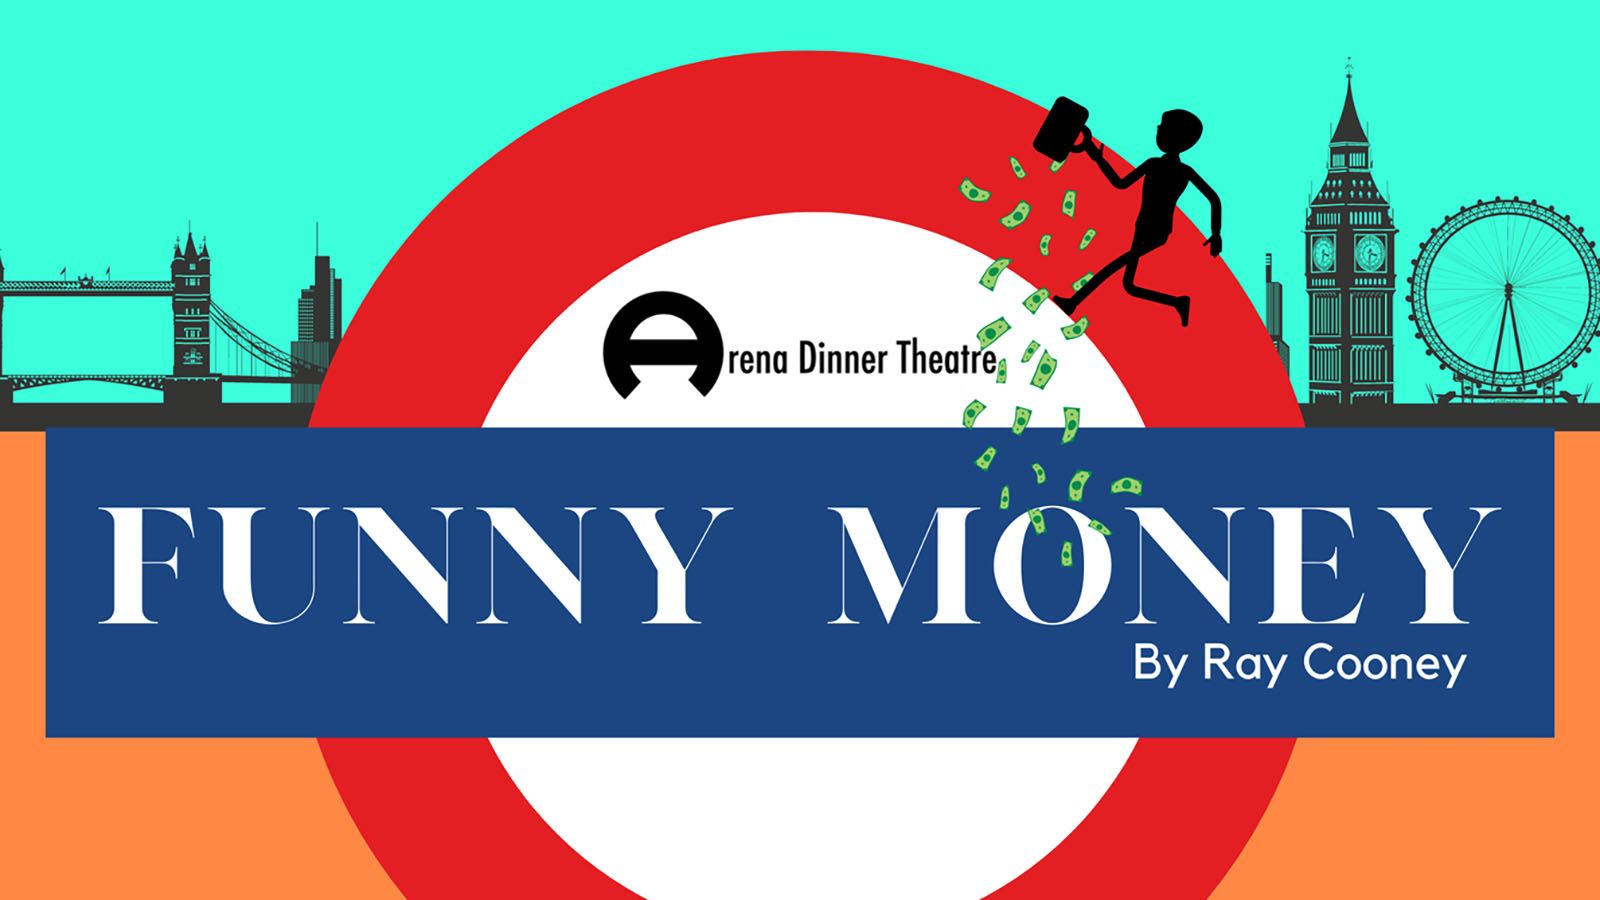 Arena Dinner Theatre's production of Funny Money opens March 1.